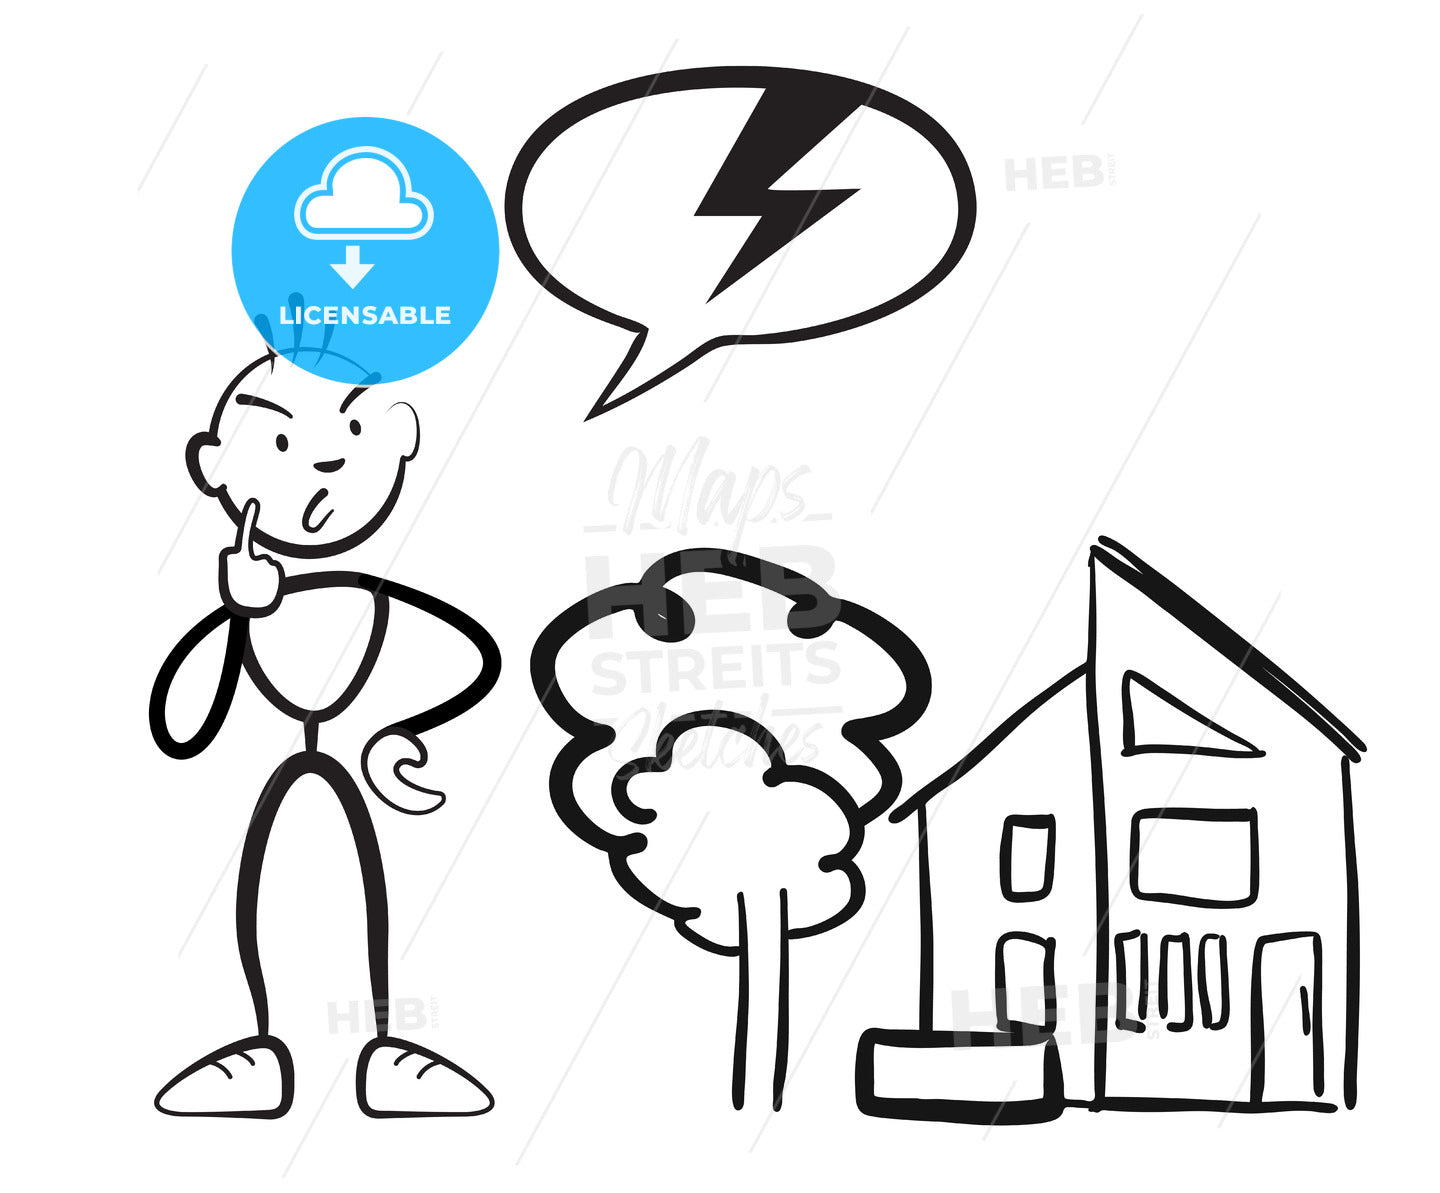 Stick figure man reports household damage – instant download